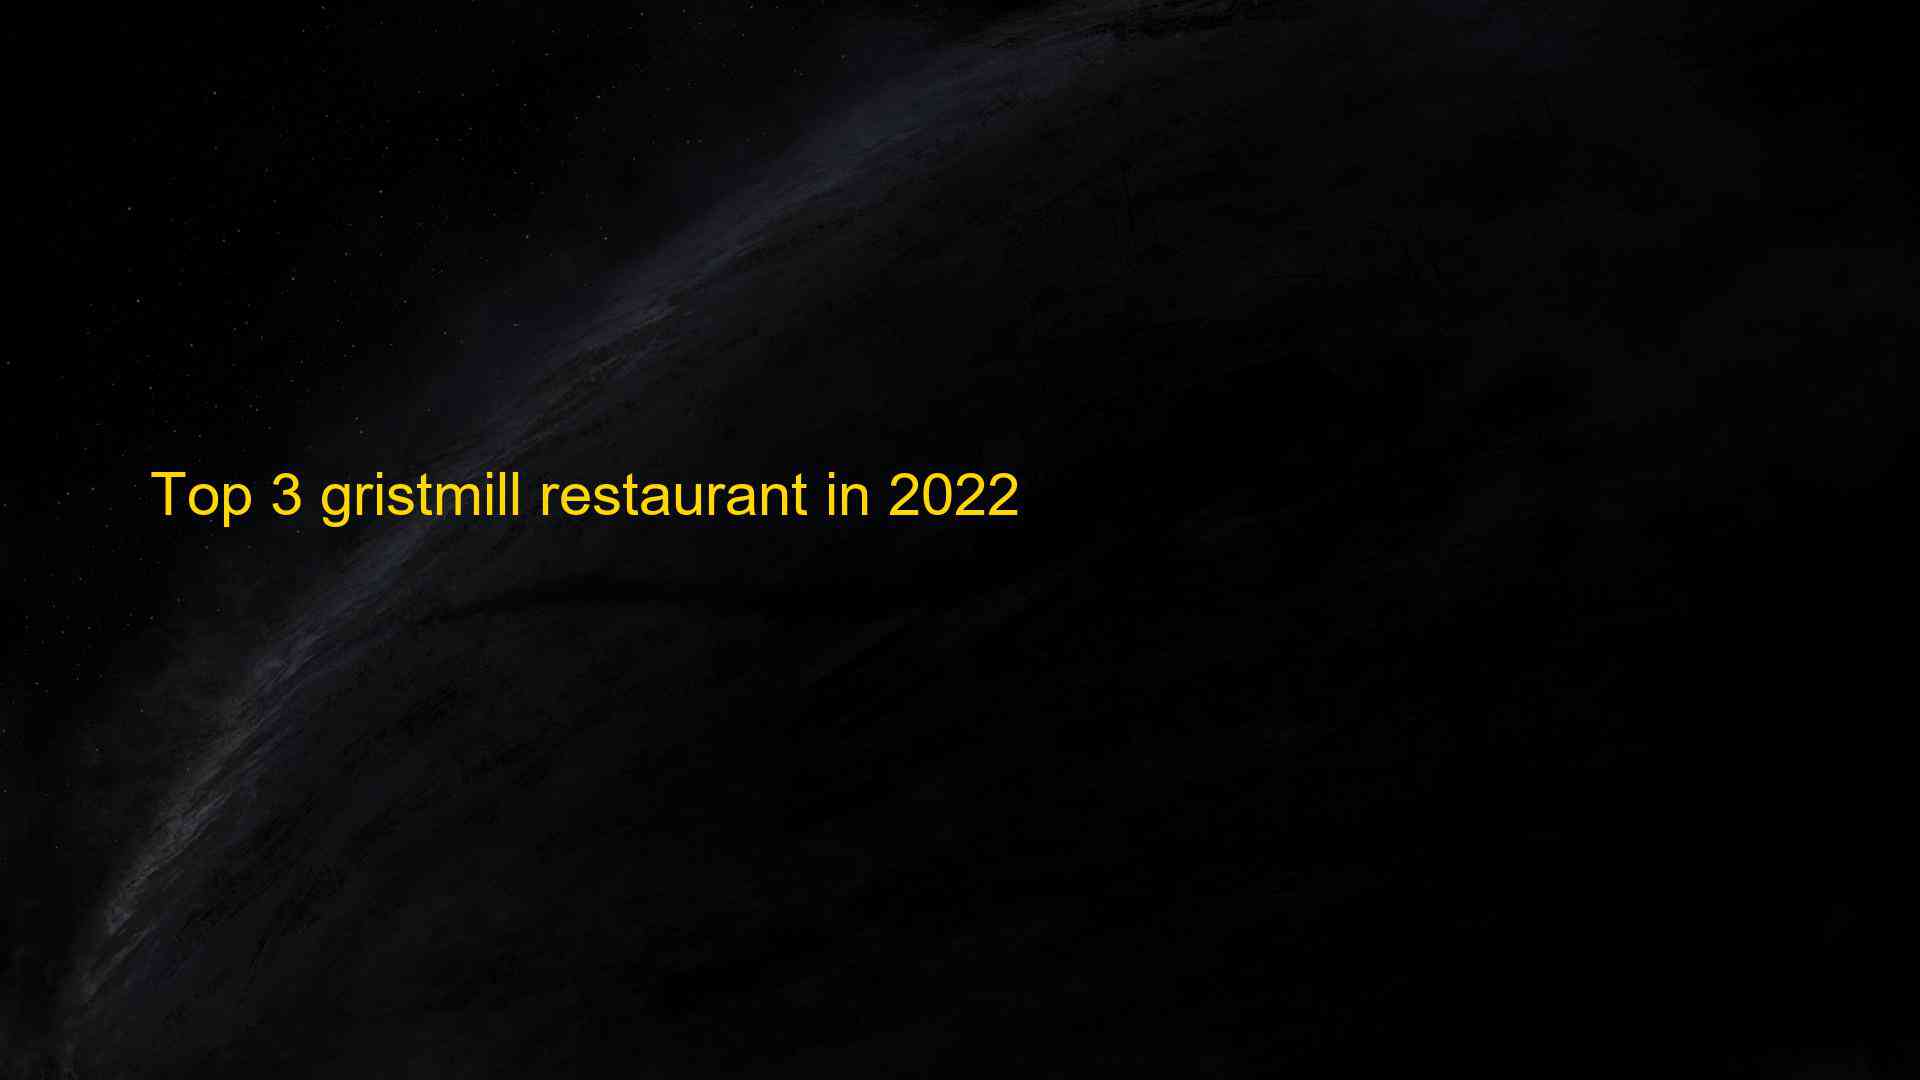 Top 3 gristmill restaurant in 2022 1663503910